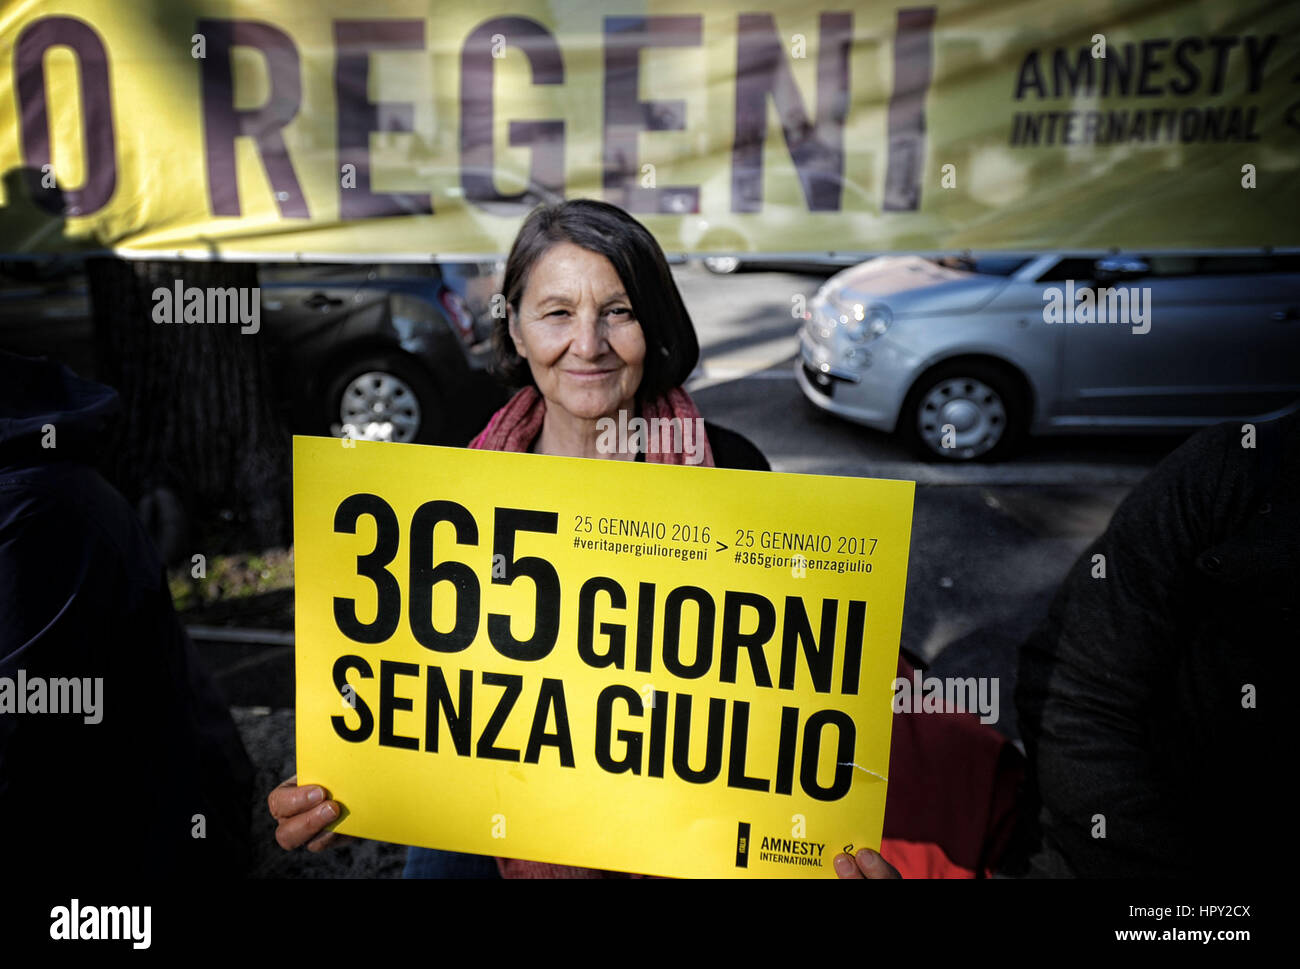 Manifestation of Amnesty International at the University La Sapienza, one year after the death of Julius Regeni  Where: Rome, Italy When: 25 Jan 2017 Credit: IPA/WENN.com  **Only available for publication in UK, USA, Germany, Austria, Switzerland** Stock Photo